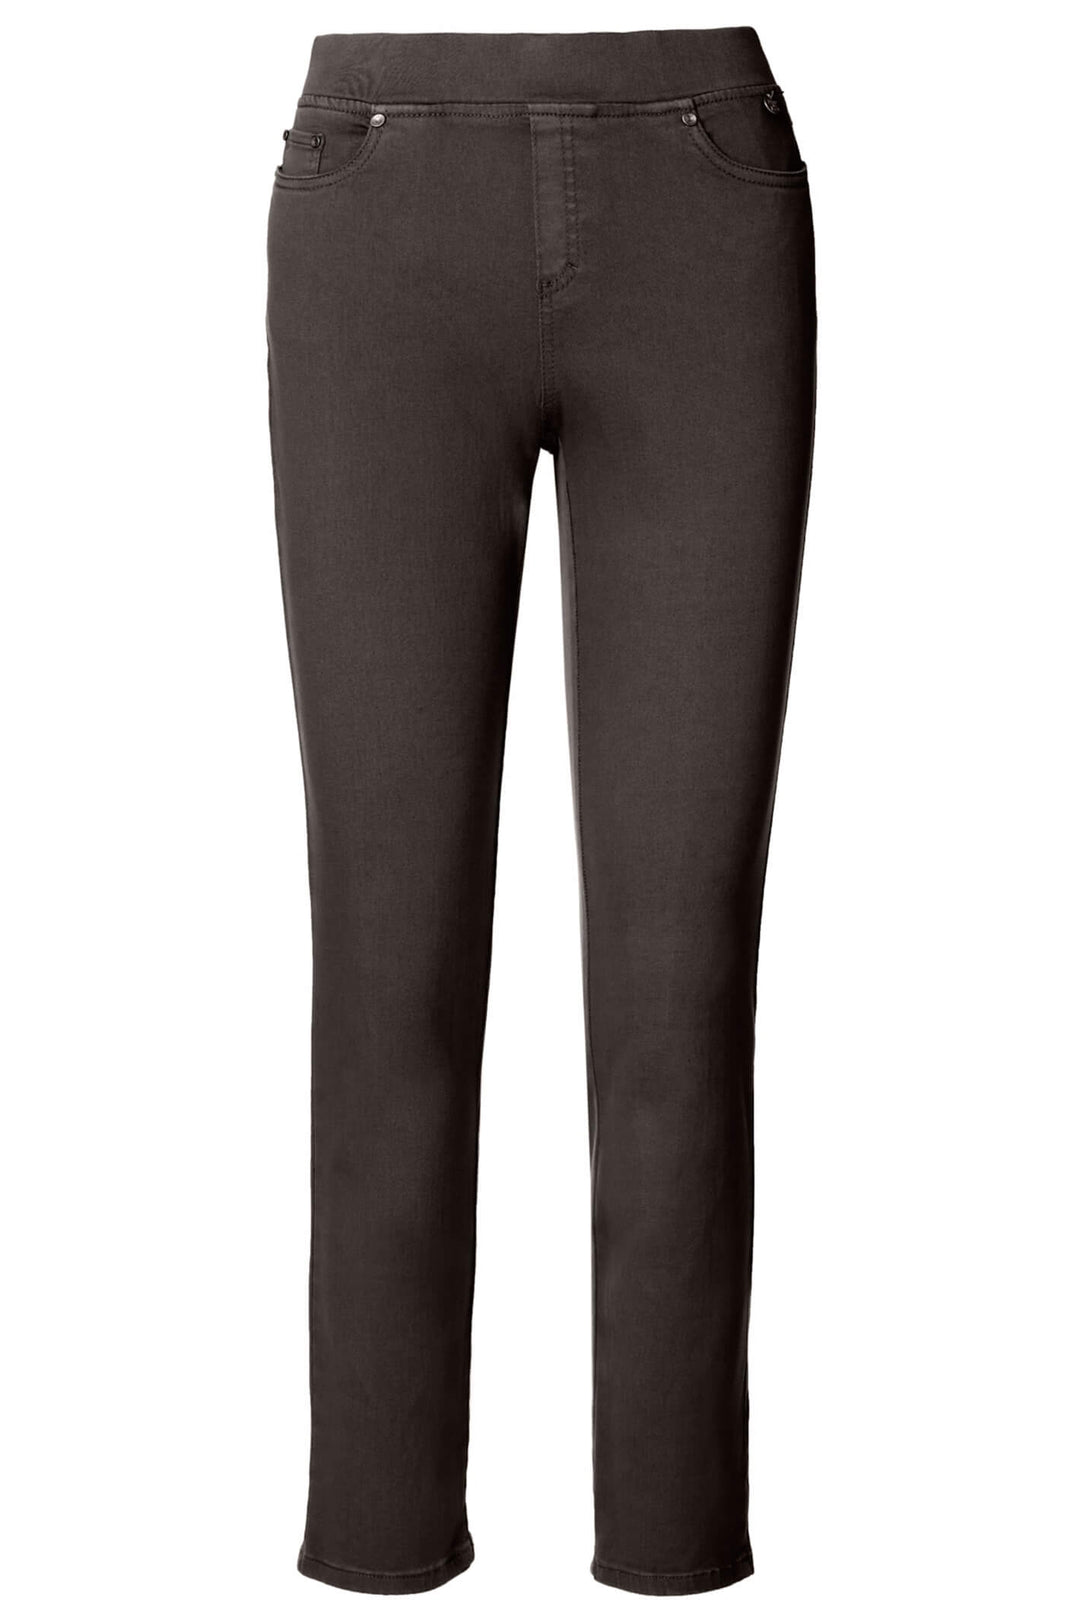 Anna Montana 1001 87 Coffee Brown Angelika Rom Jump-In-Jeans 30 Inch - Shirley Allum Boutique